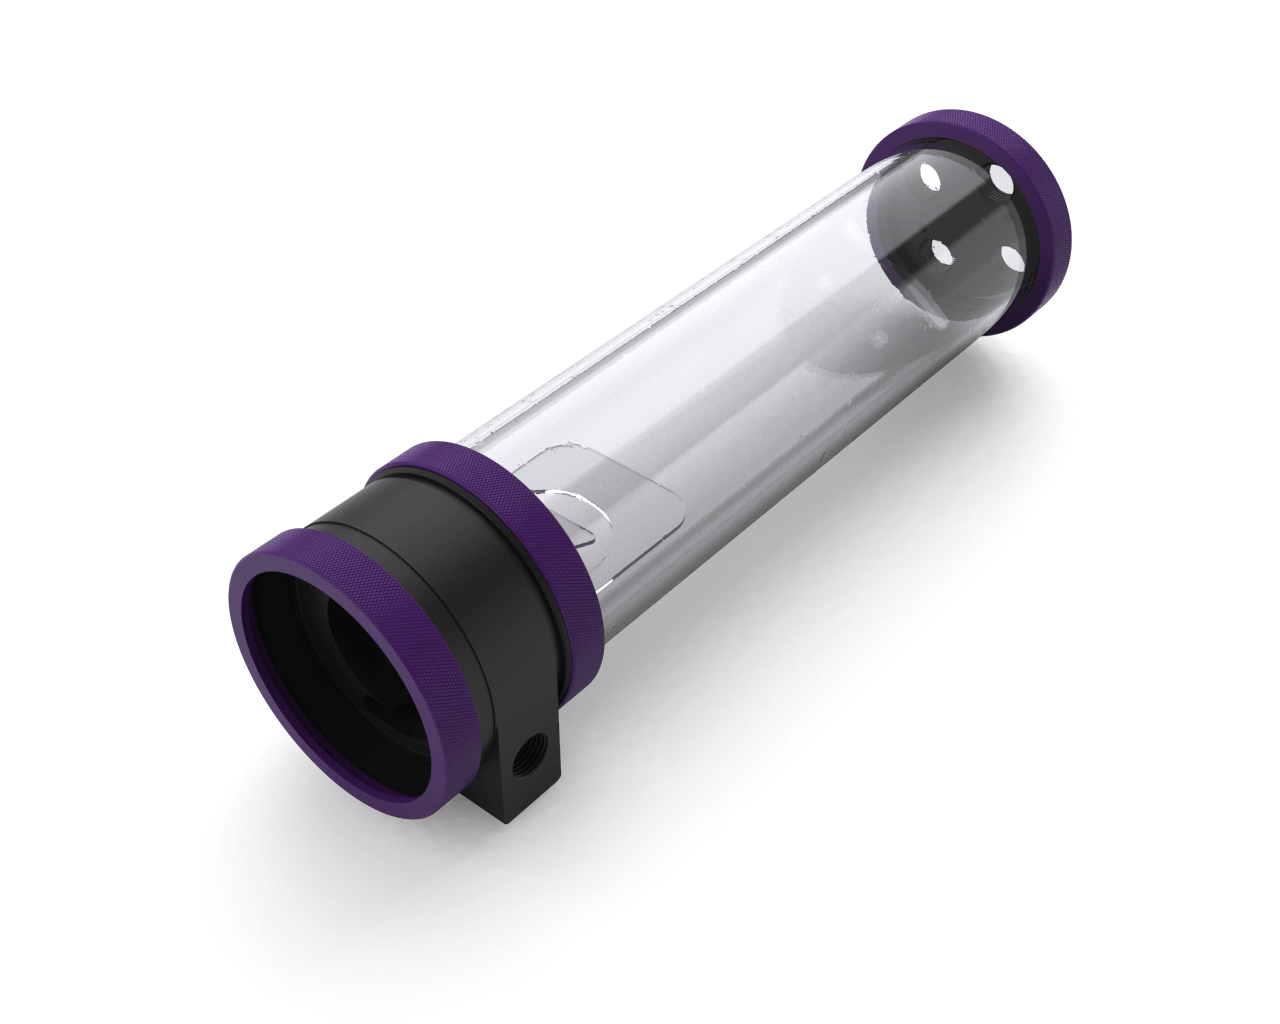 PrimoChill CTR SFF Phase II High Flow D5 Enabled Reservoir System - Black POM - 240mm - PrimoChill - KEEPING IT COOL TX Matte Purple